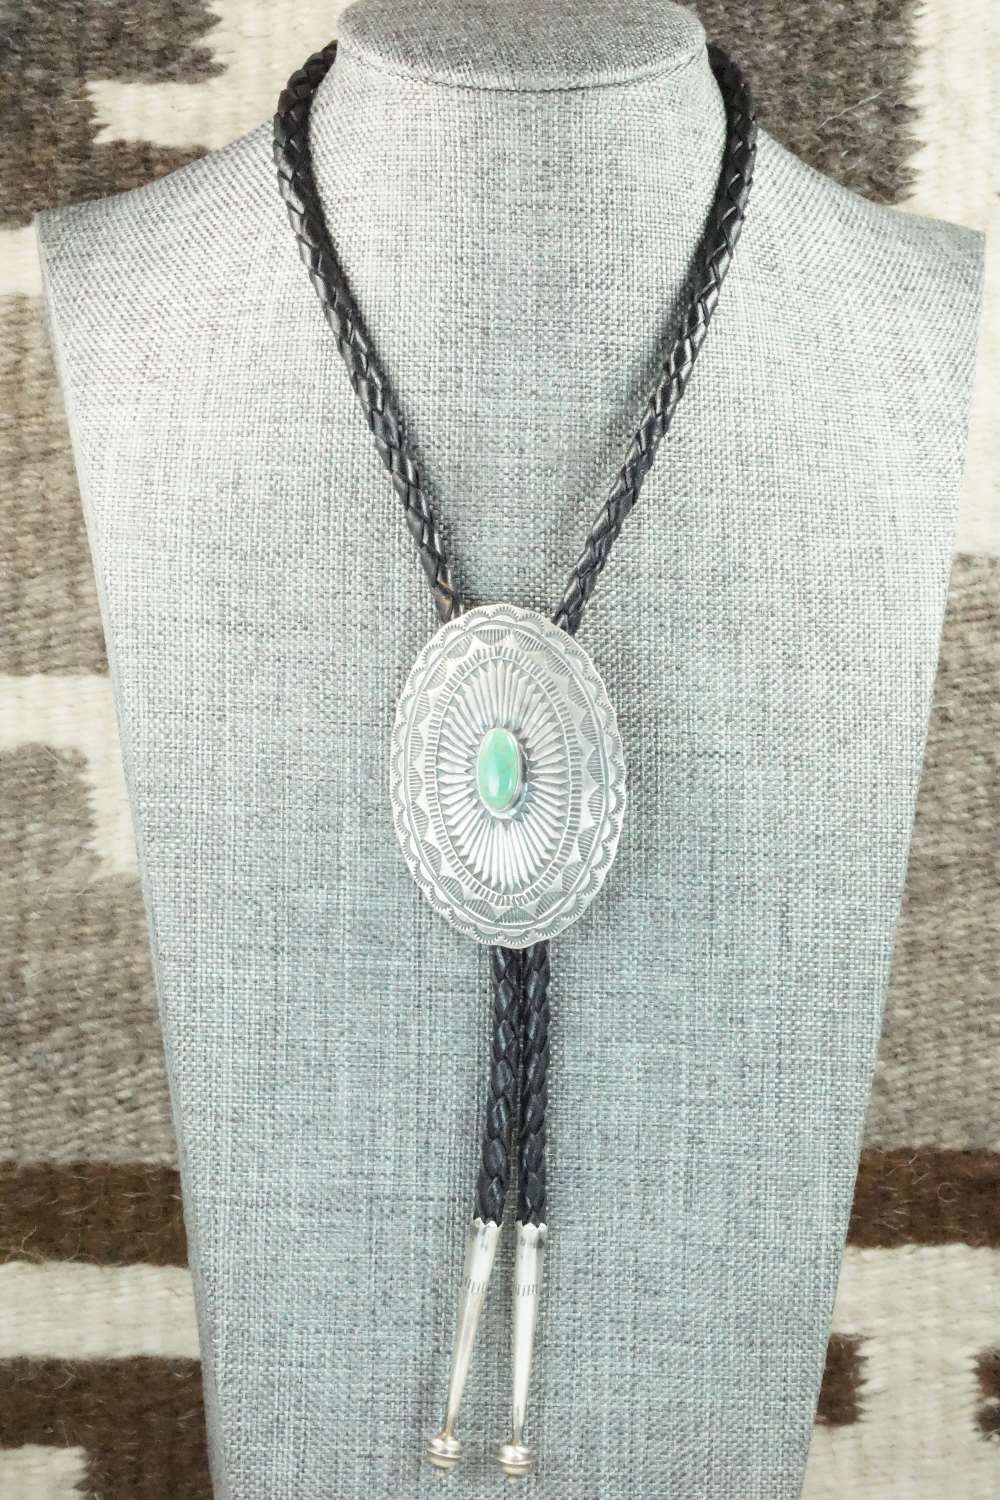 Turquoise & Sterling Silver Bolo Tie - Arnold Blackgoat